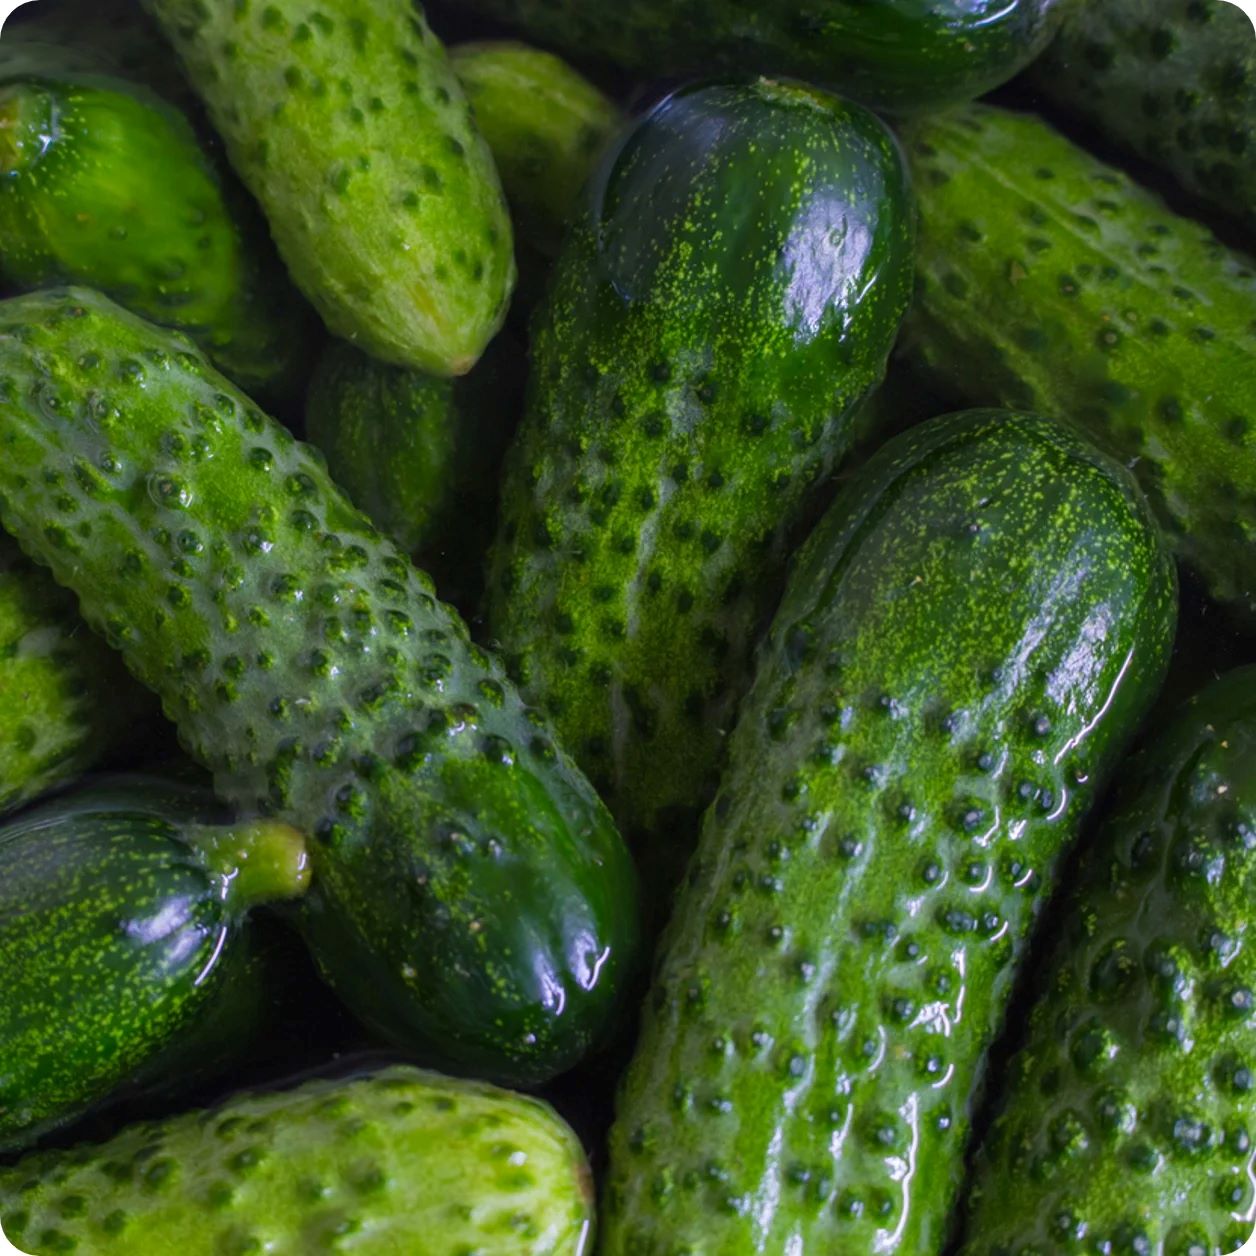 How To Store Pickling Cucumbers